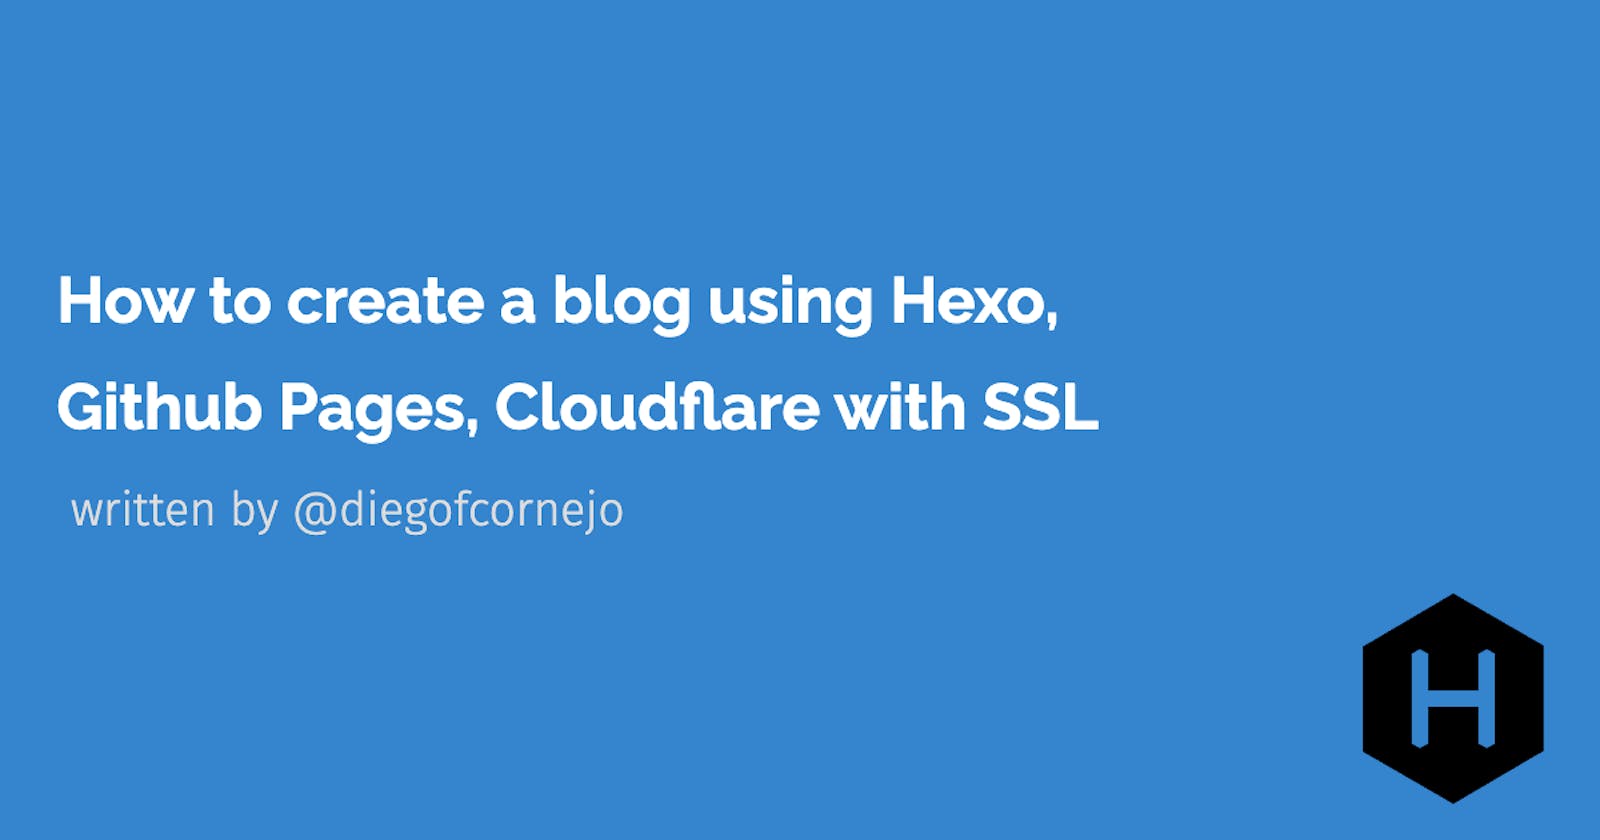 How to create a blog using Hexo, Github Pages, Cloudflare with SSL